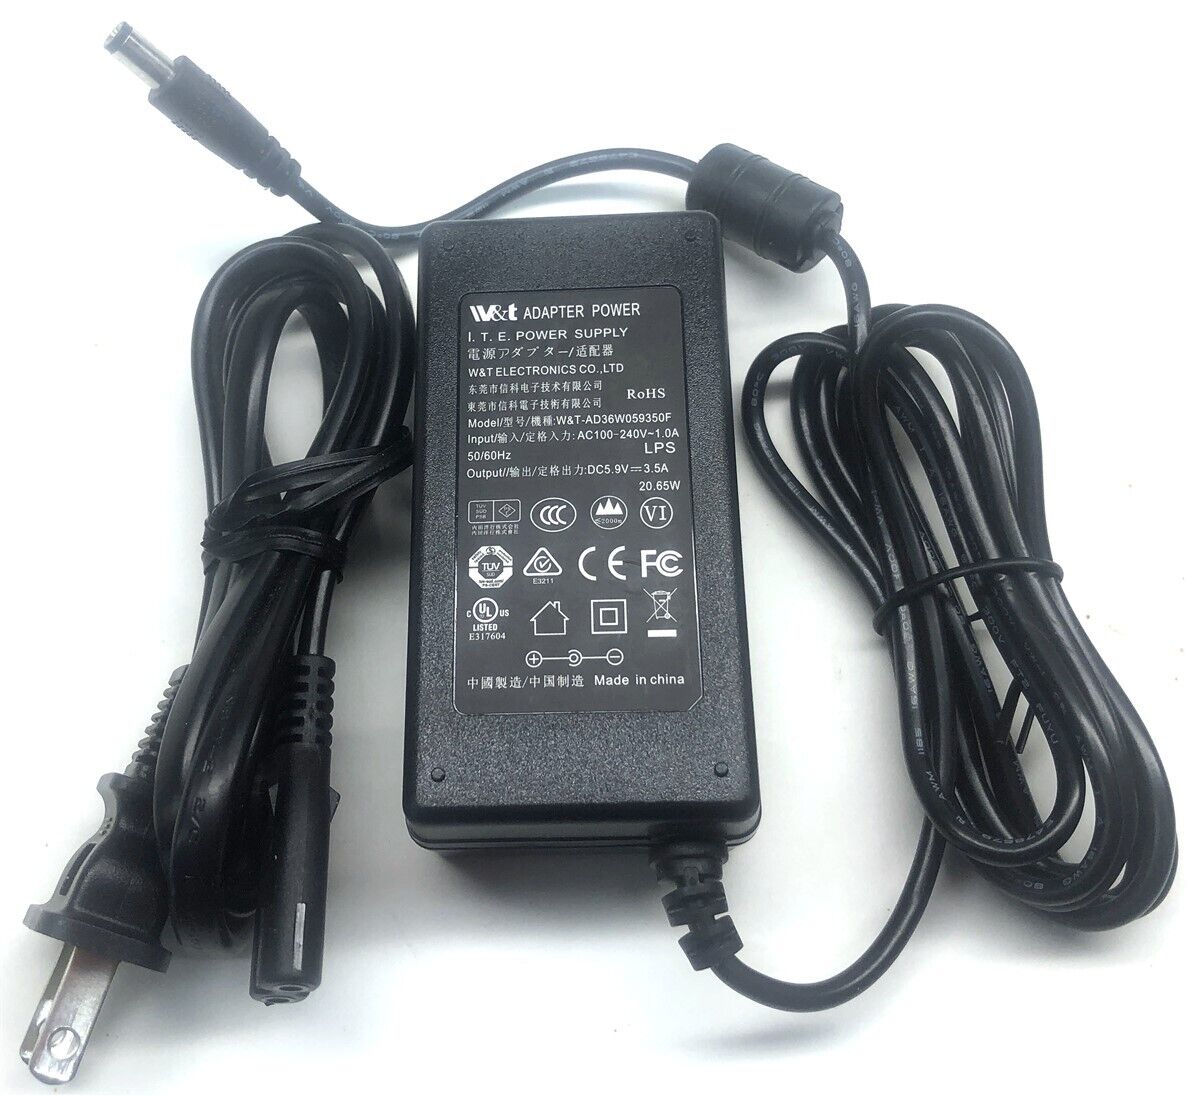 W&T Charger AC/DC Adapter Power Supply W&T-AD36W059350F 5.9V DC 3.5A 20.65W Brand W&T Type AC/DC Adapter MPN W&T-AD36W0